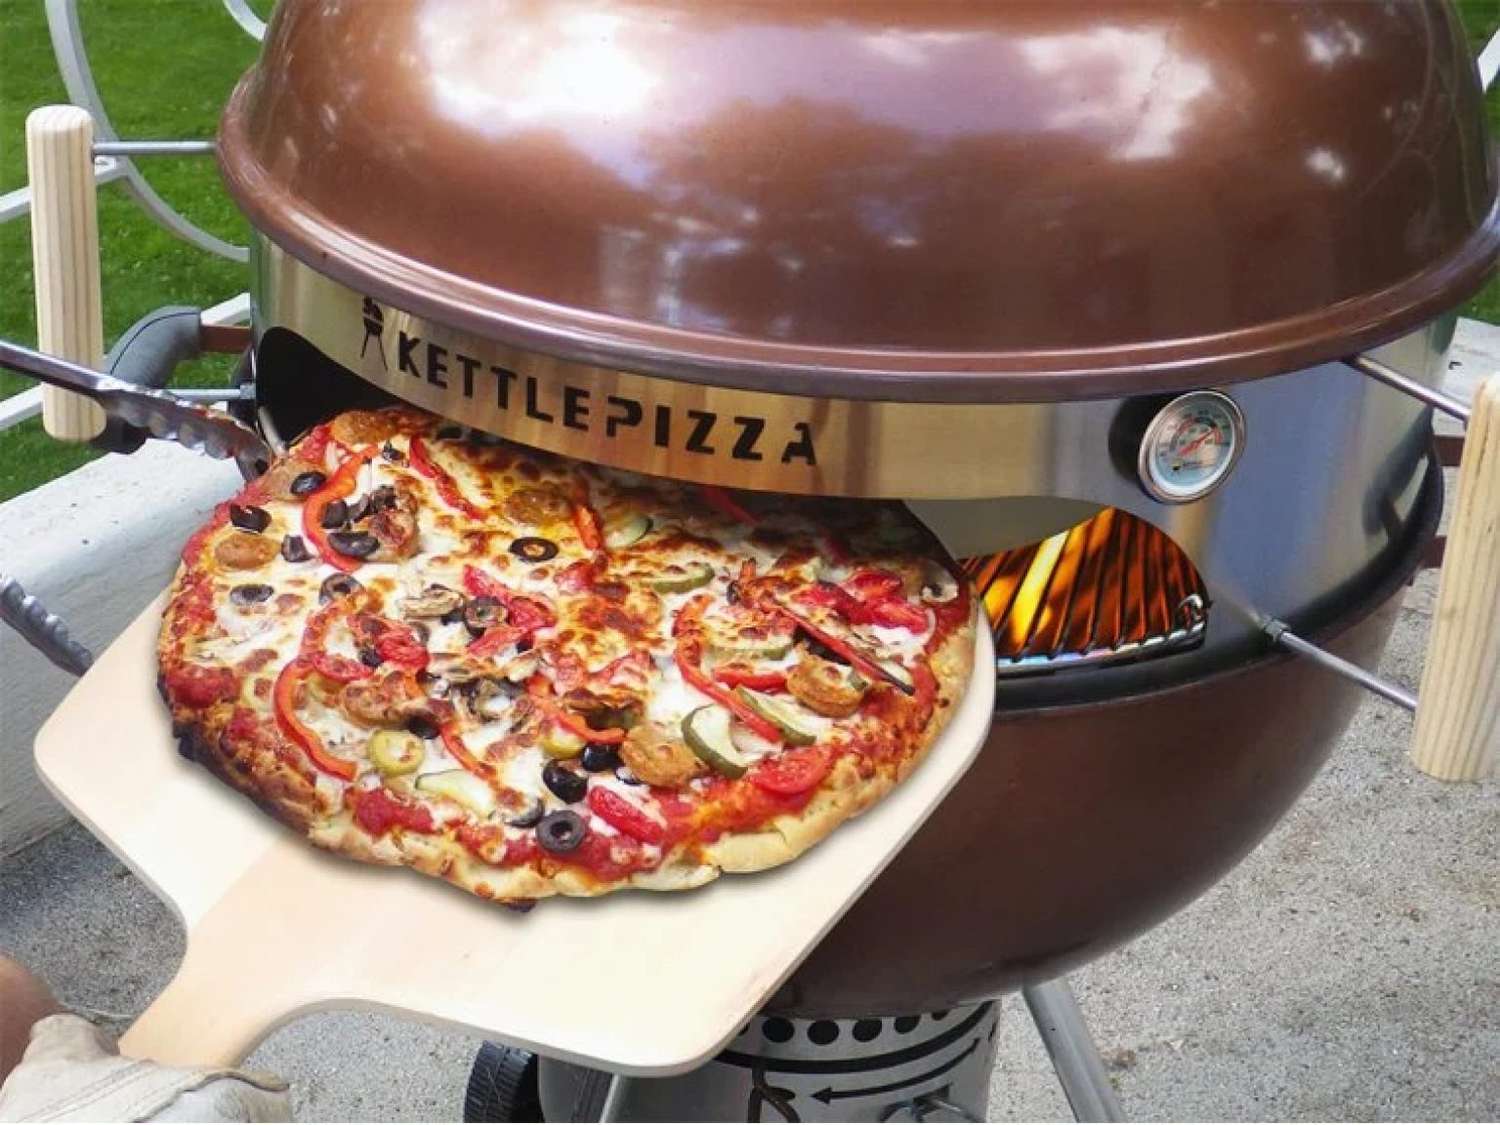 Experience the sizzle and aroma of a perfect wood-fired pizza at home with KettlePizza!